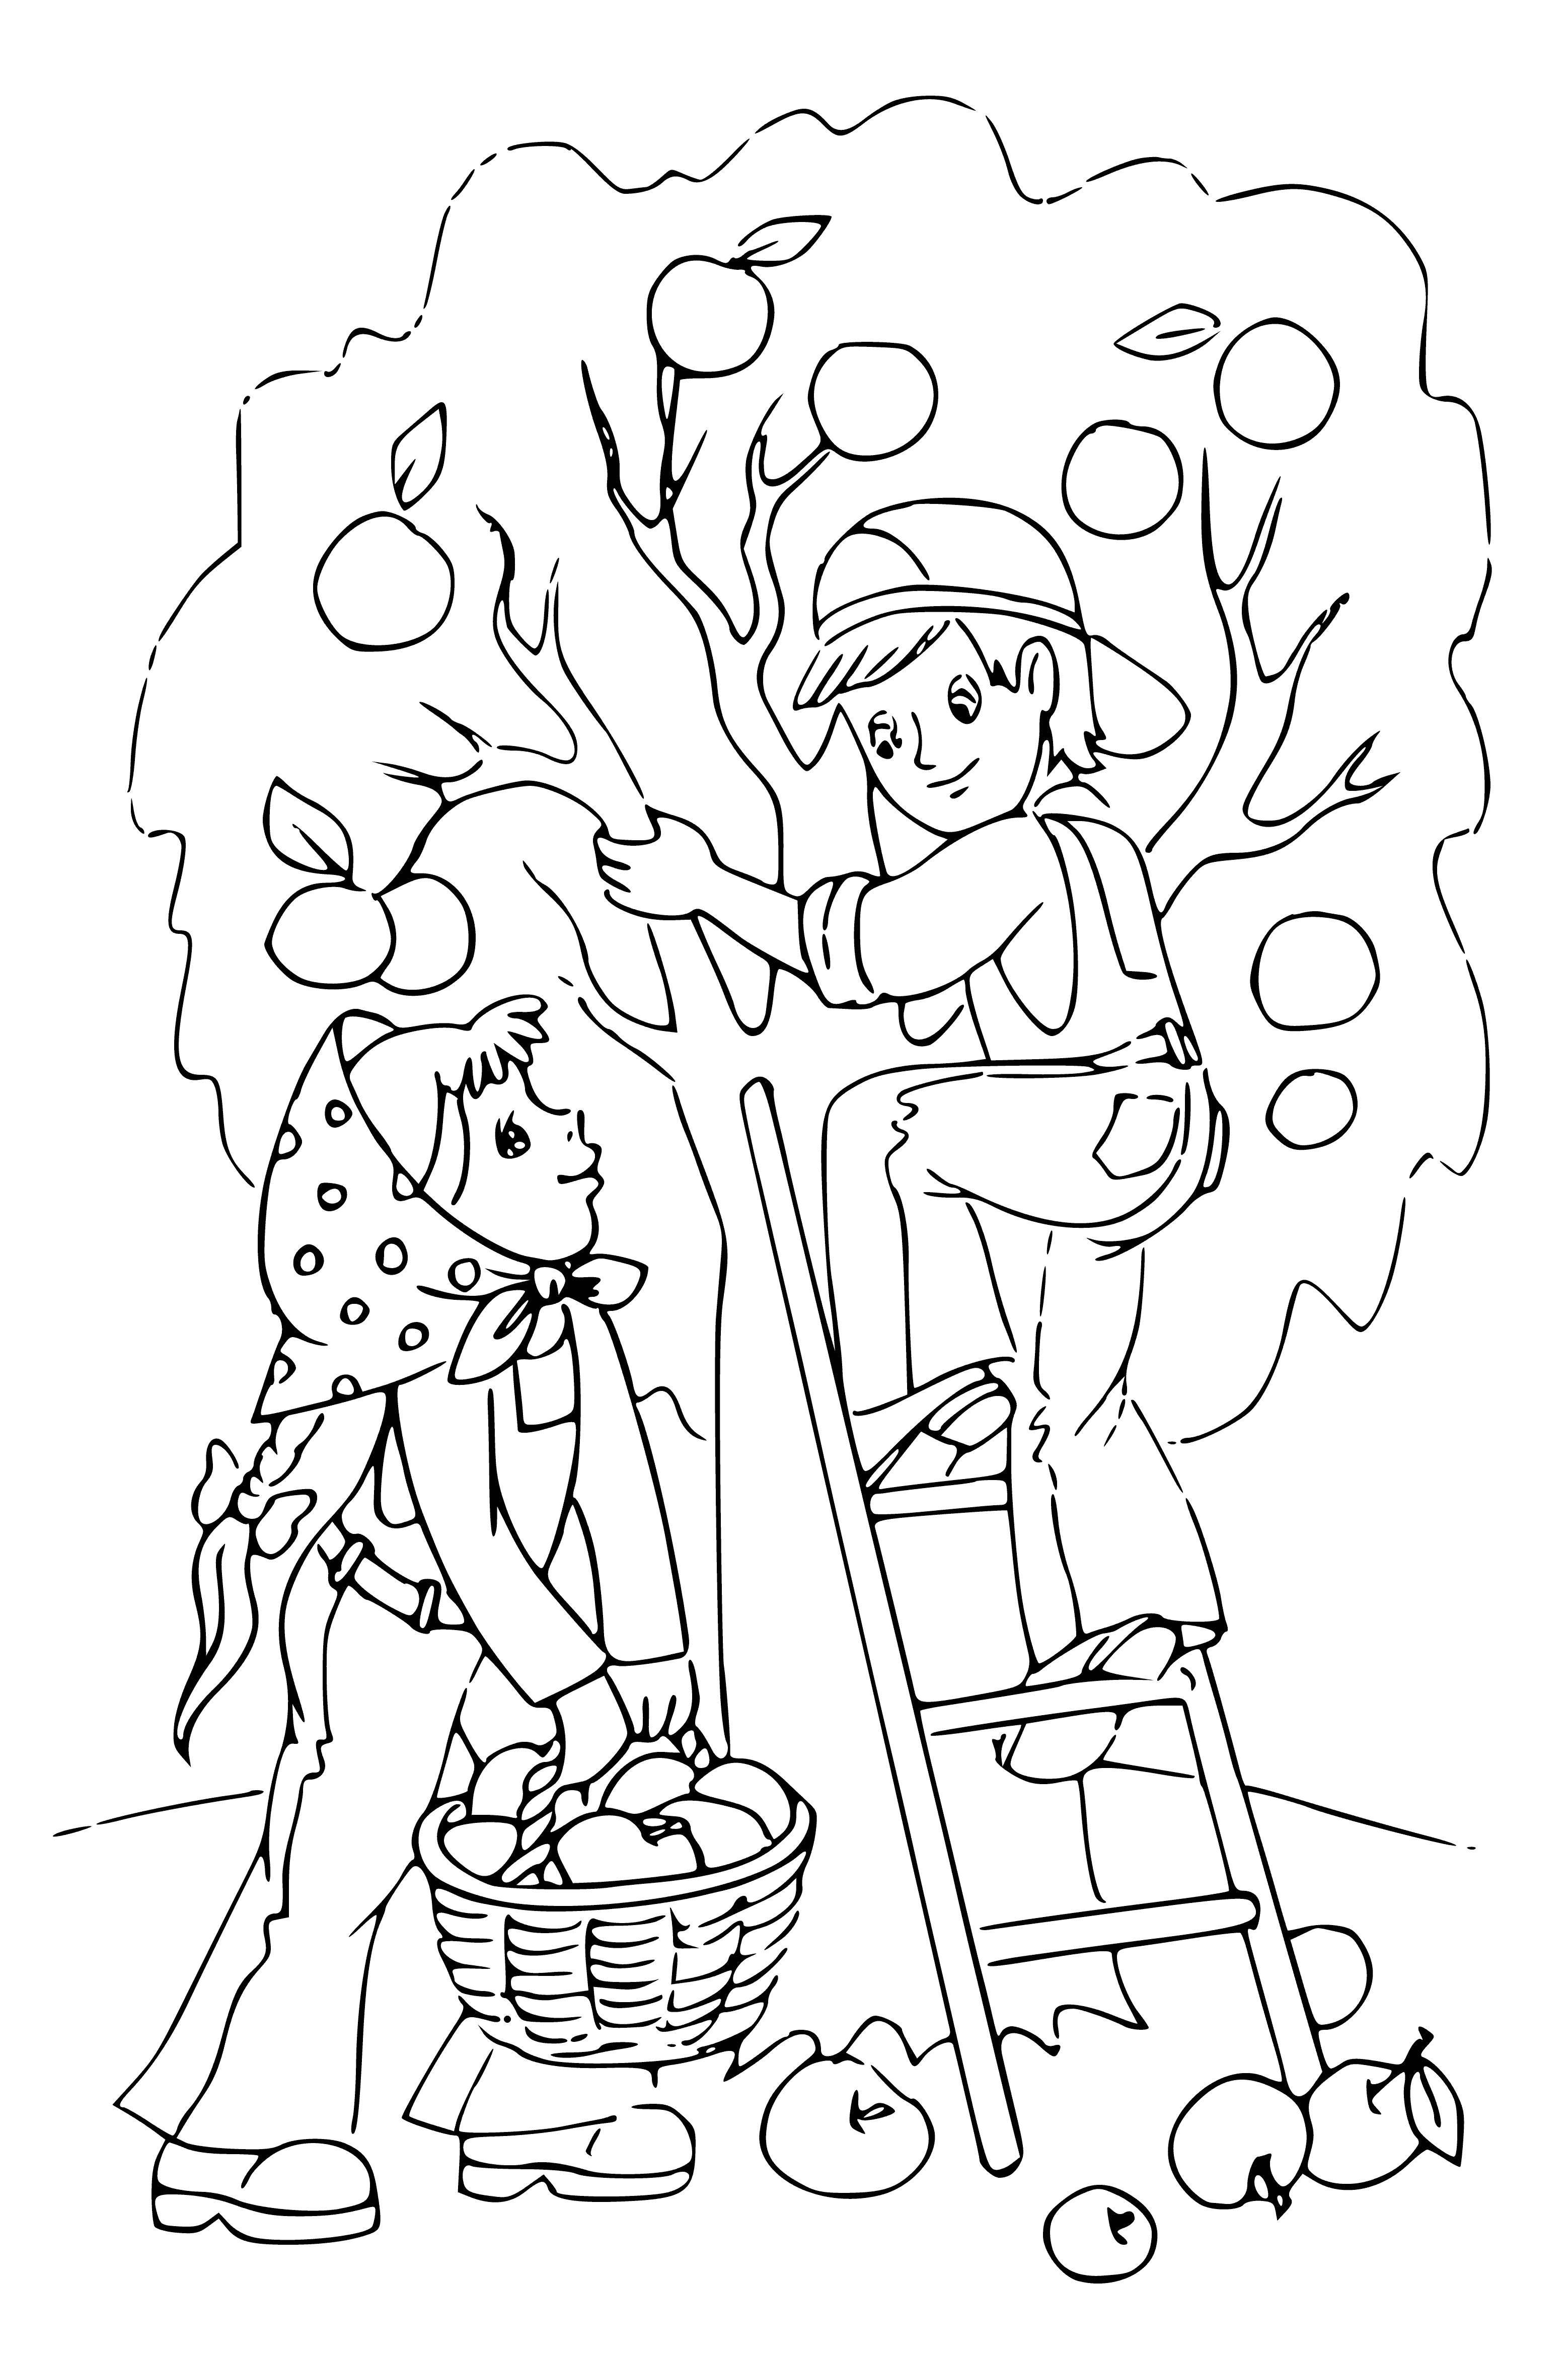 coloring page: Plump orange pumpkin surrounded by colorful leaves; scarecrow in plaid, straw-filled body, yellow ladder & red bucket overflowing with more pumpkins. #autumn